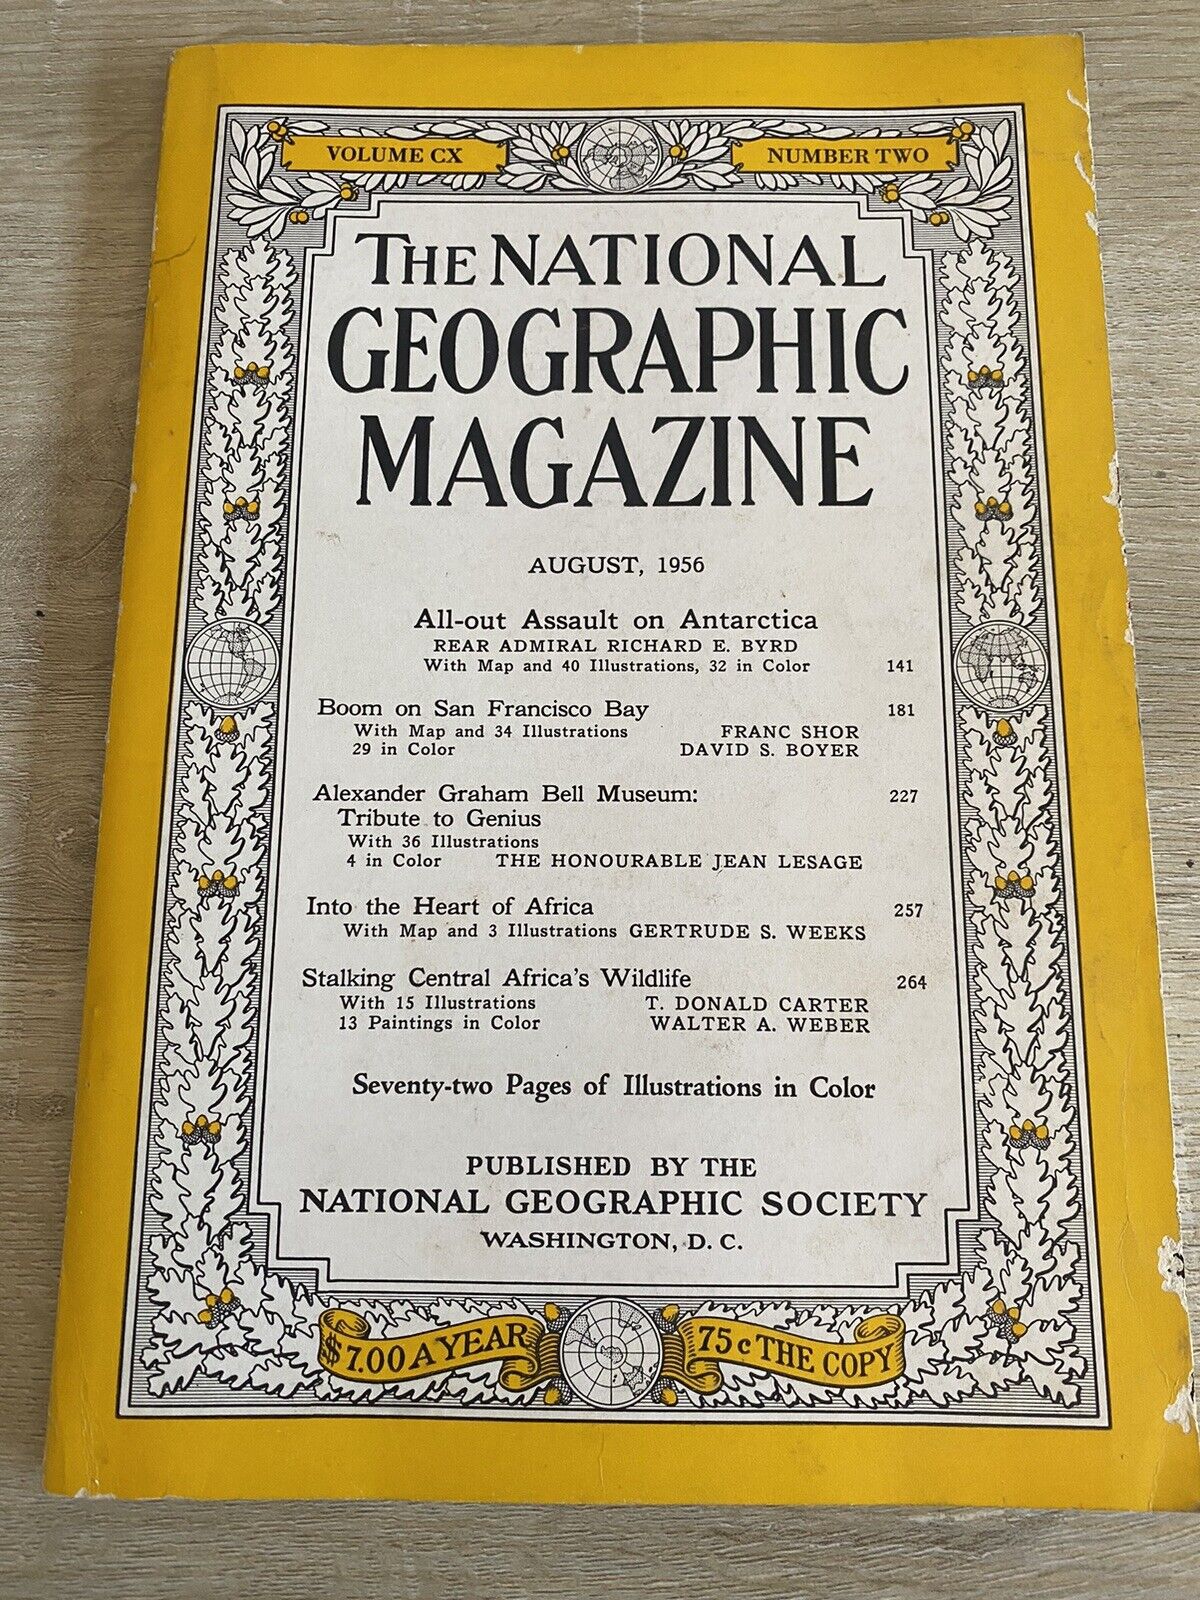 Vintage August 1956 National Geographic Magazine - Very Good